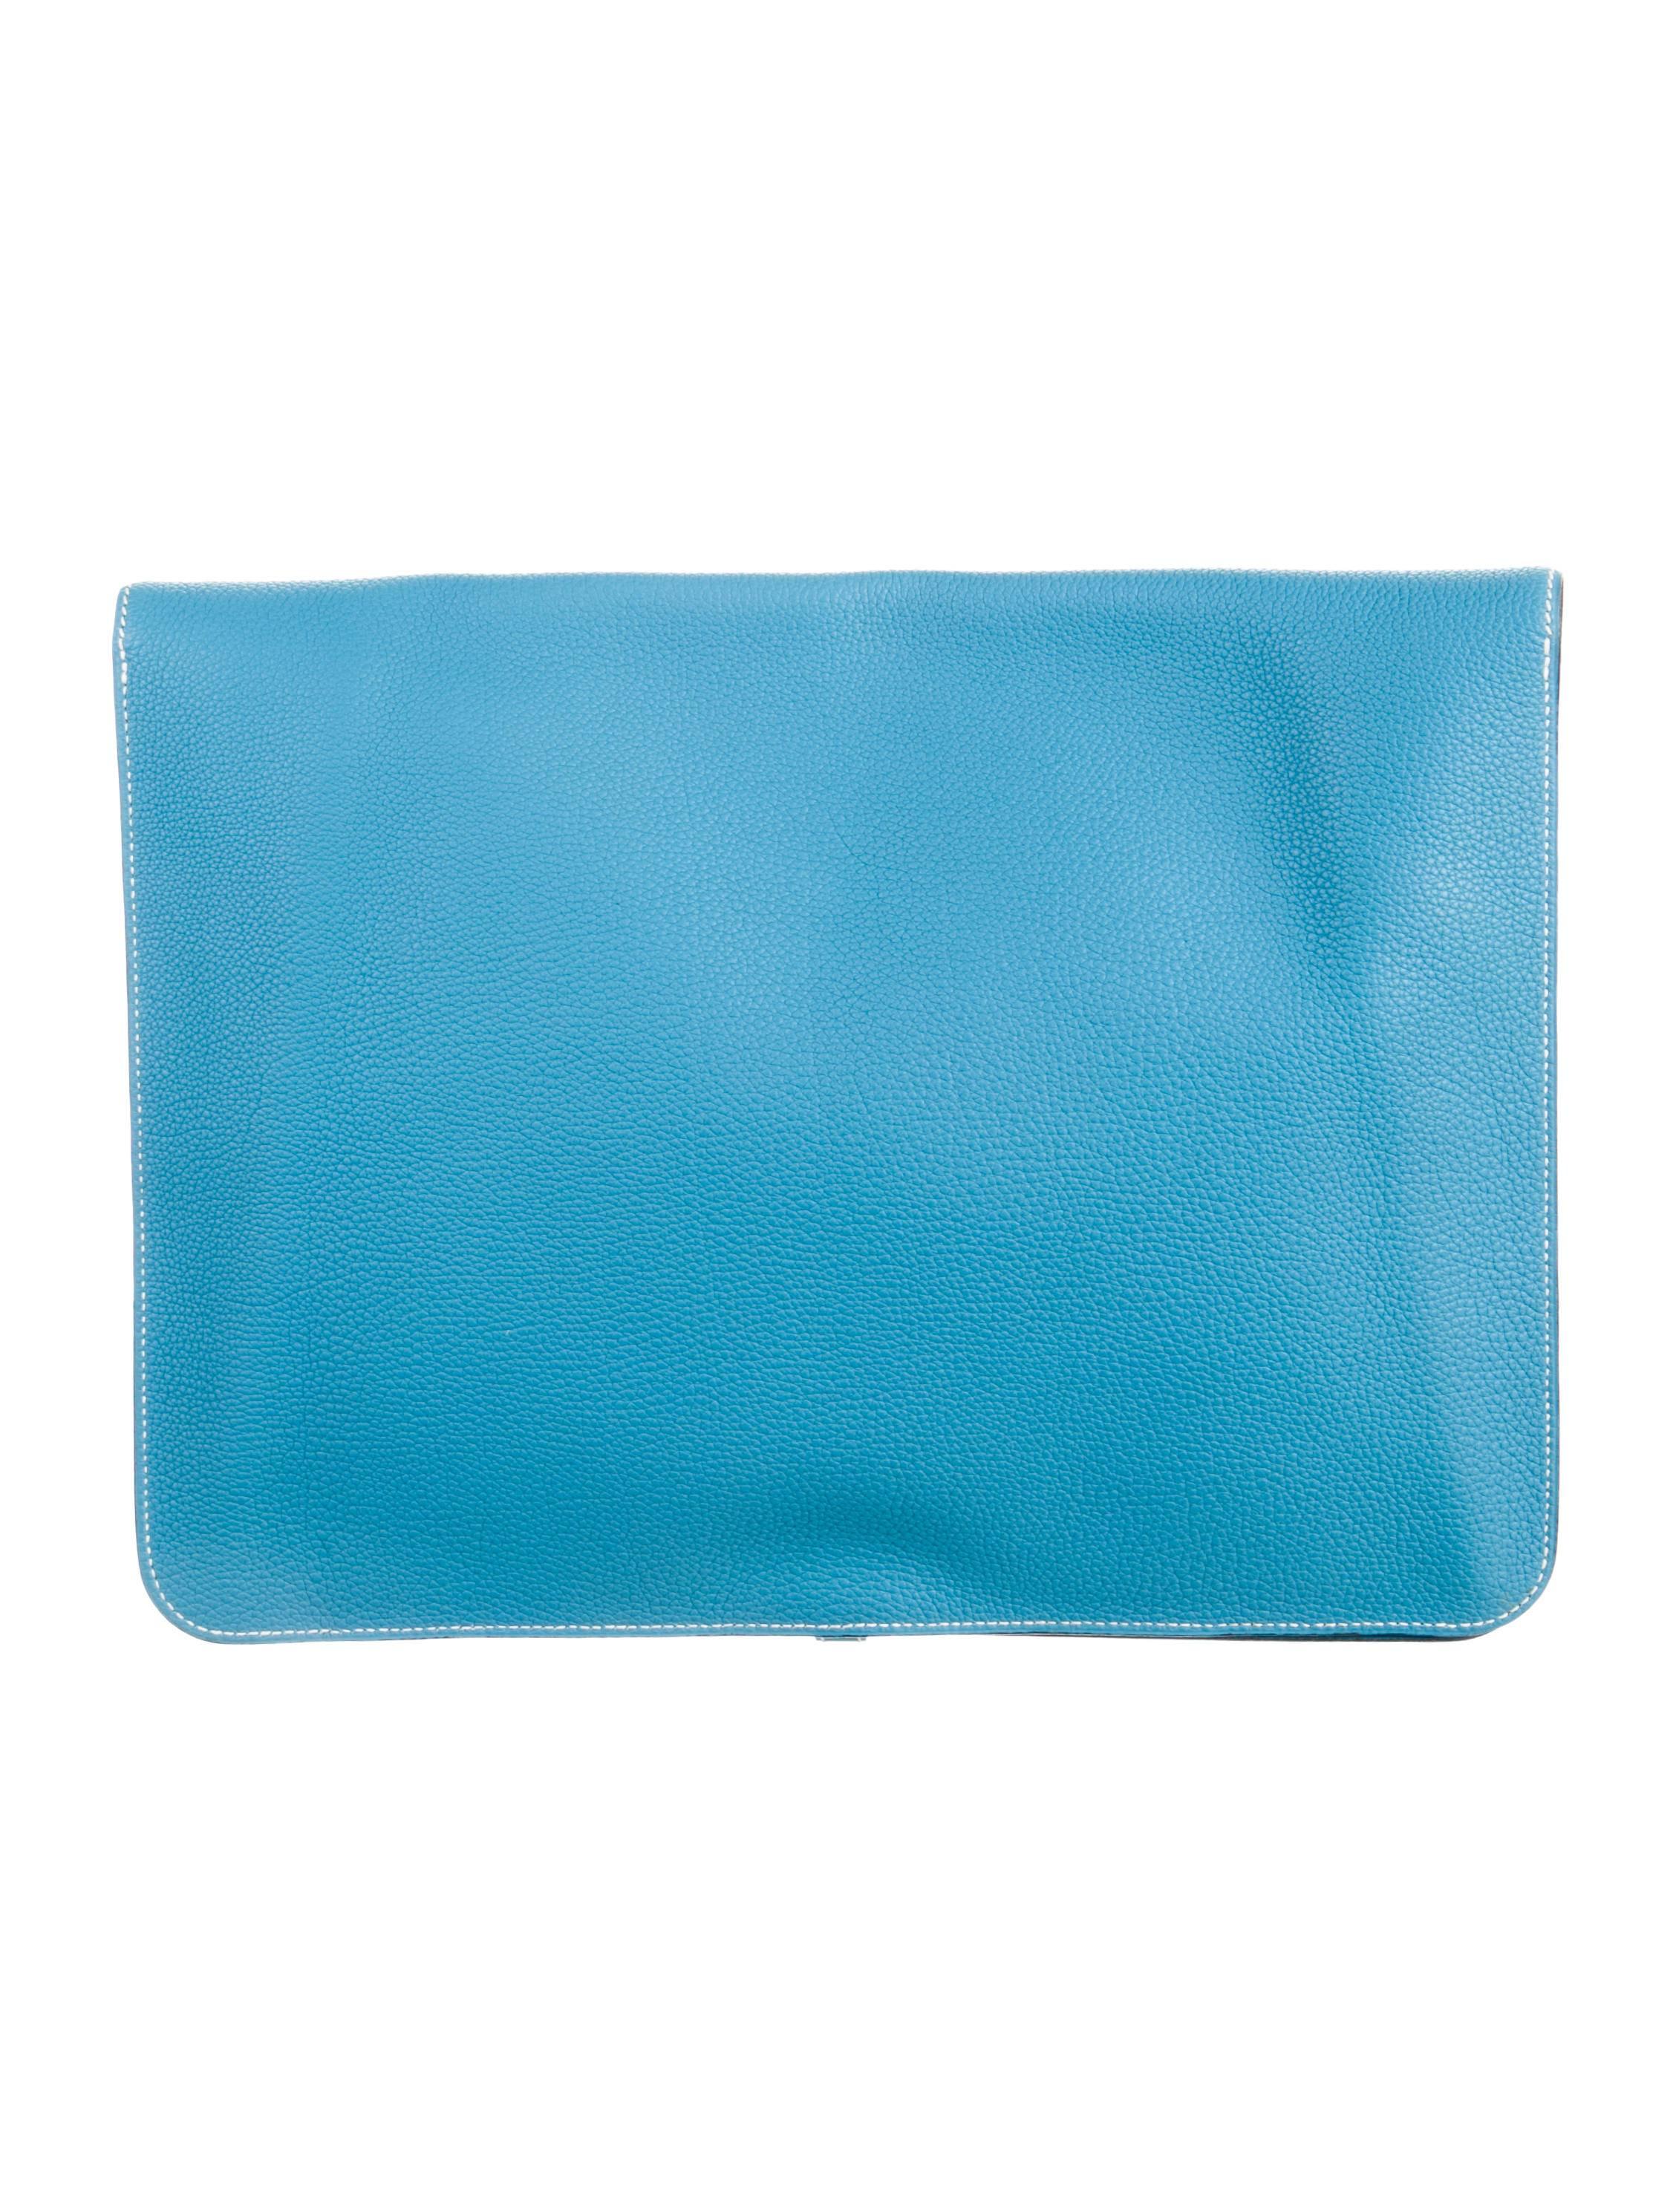 Hermes Turquoise Togo Leather Flap Attache Envelope Tech Accessory Clutch Bag In Excellent Condition In Chicago, IL